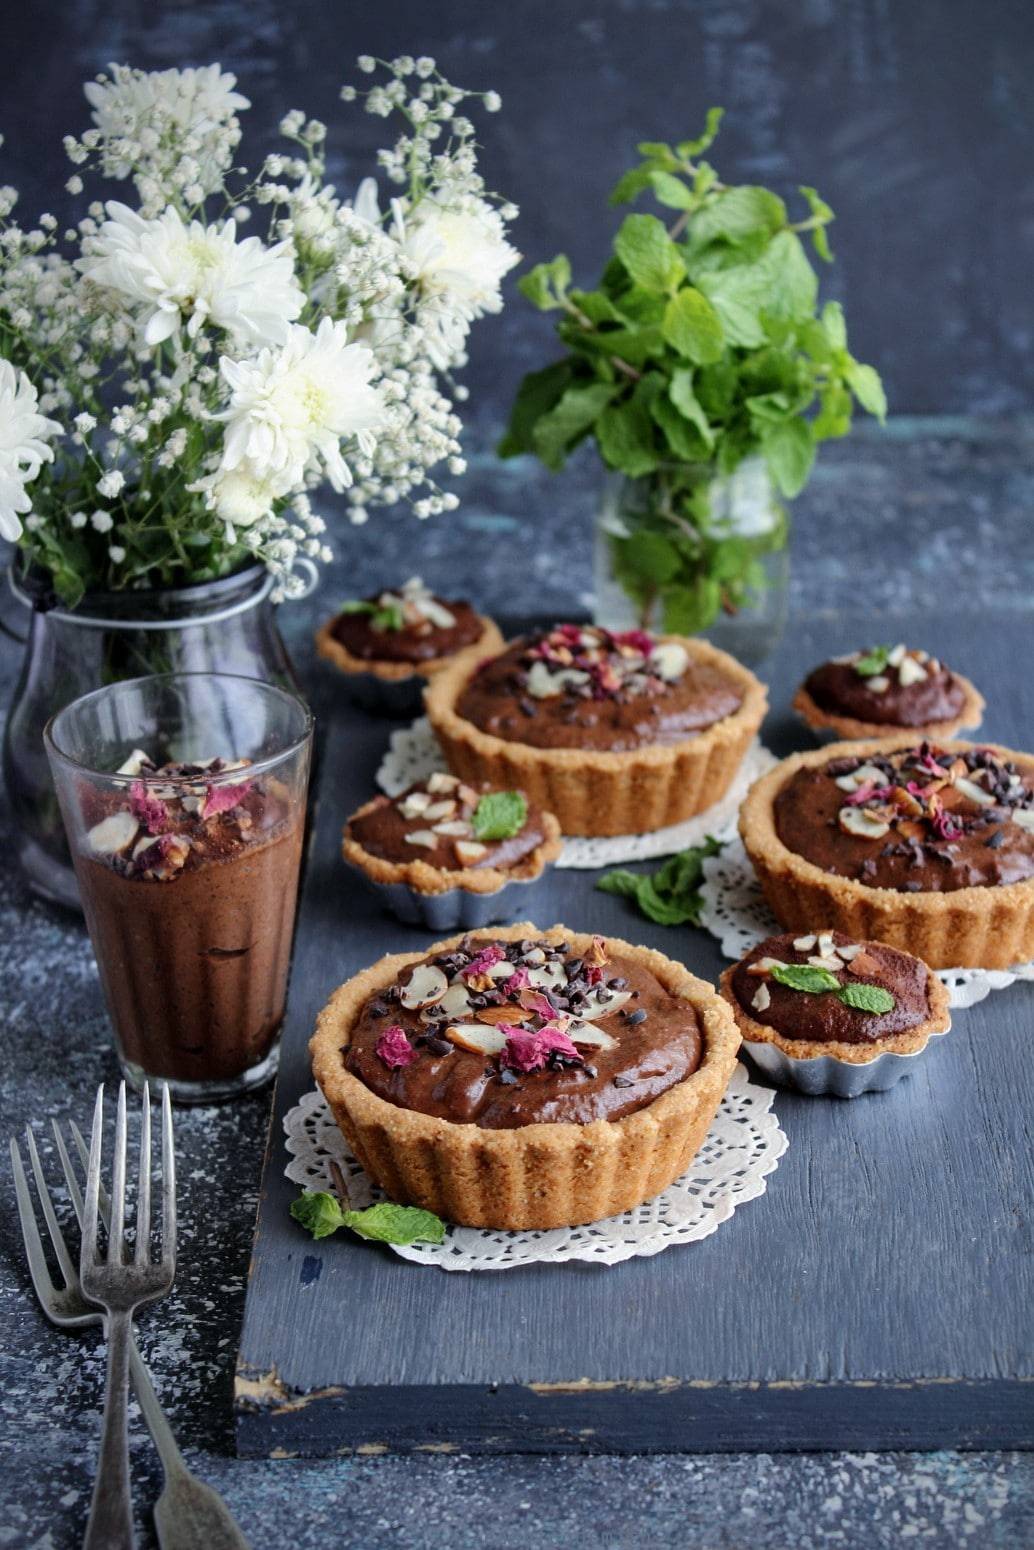 Chocolate Chia Mousse Tartlets - Plattershare - Recipes, food stories and food lovers